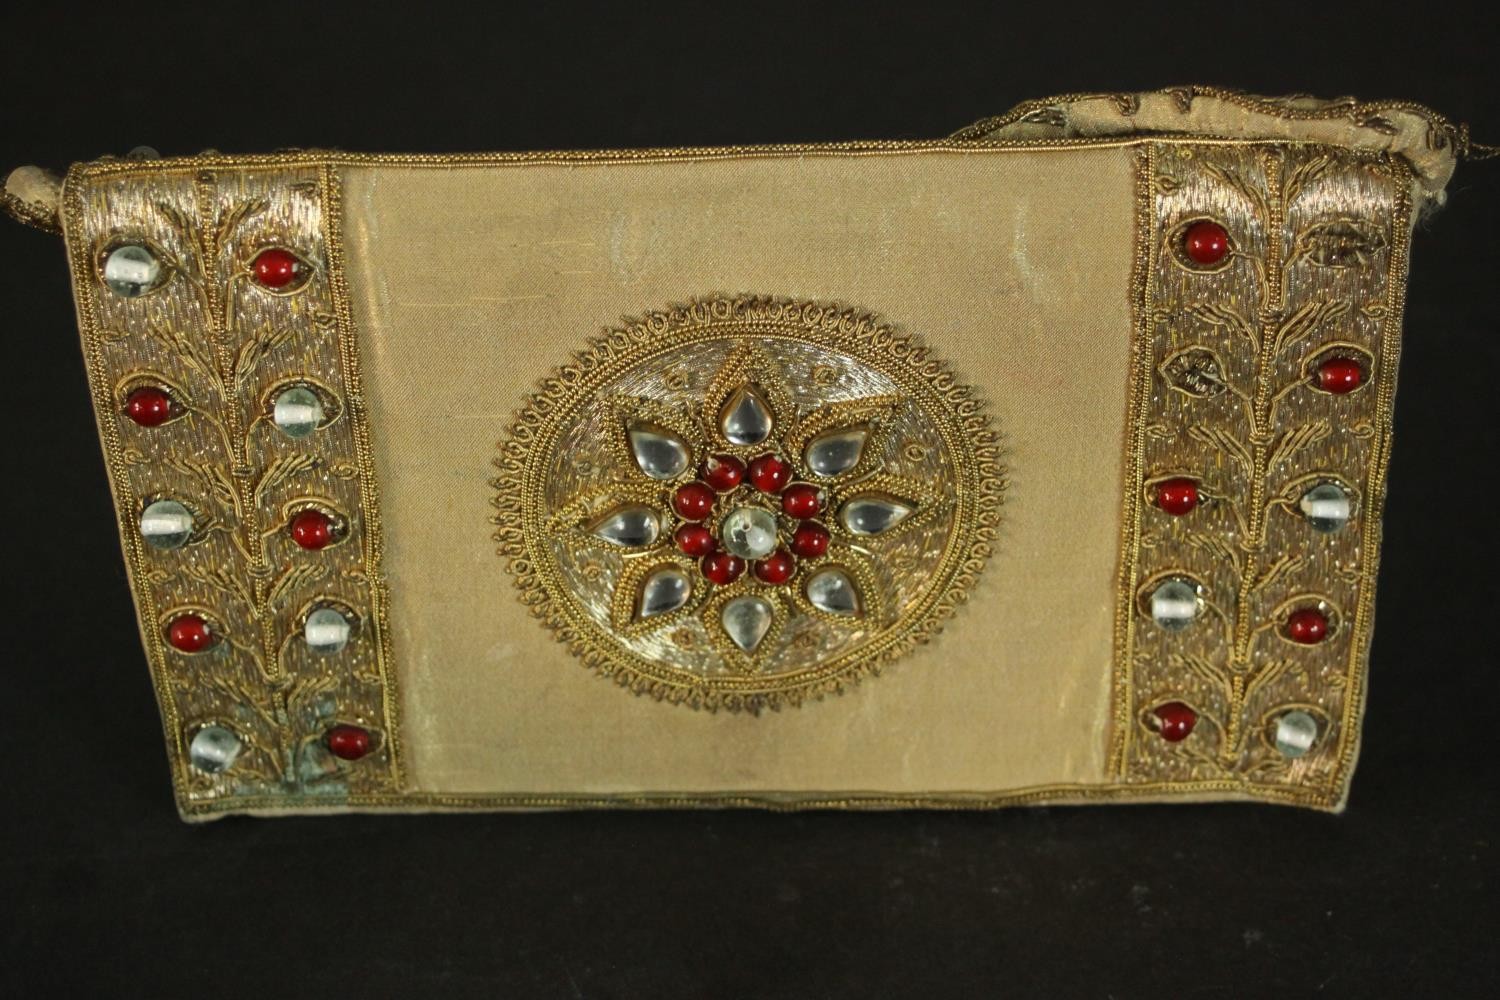 Two vintage clutch handbags, including an Indian gold brocade and glass cabochon detailed evening - Image 9 of 10